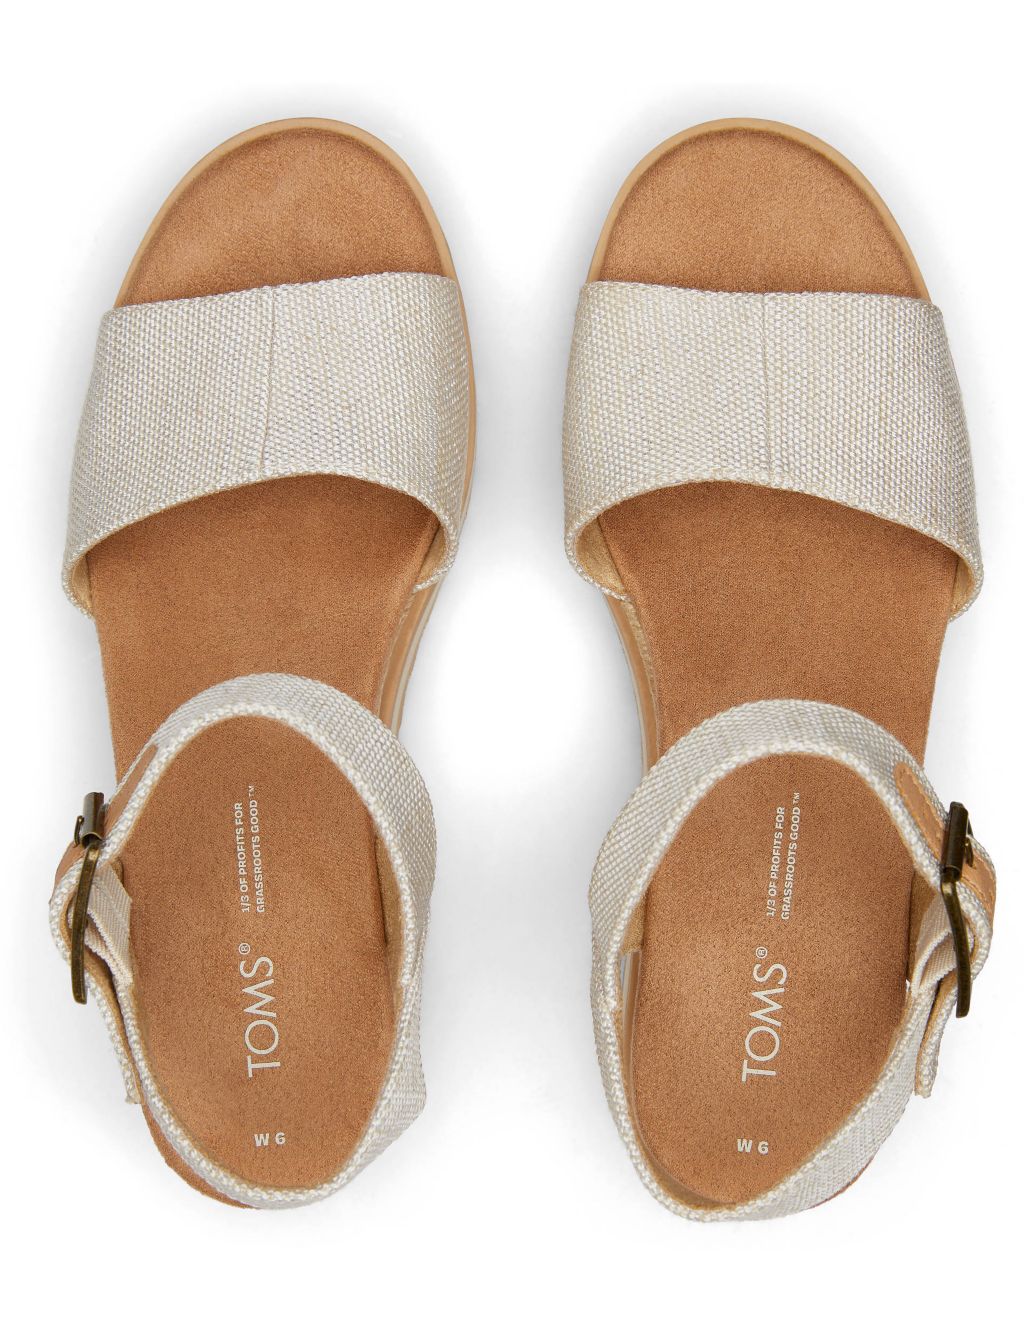 Canvas Buckle Ankle Strap Wedge Espadrilles image 3